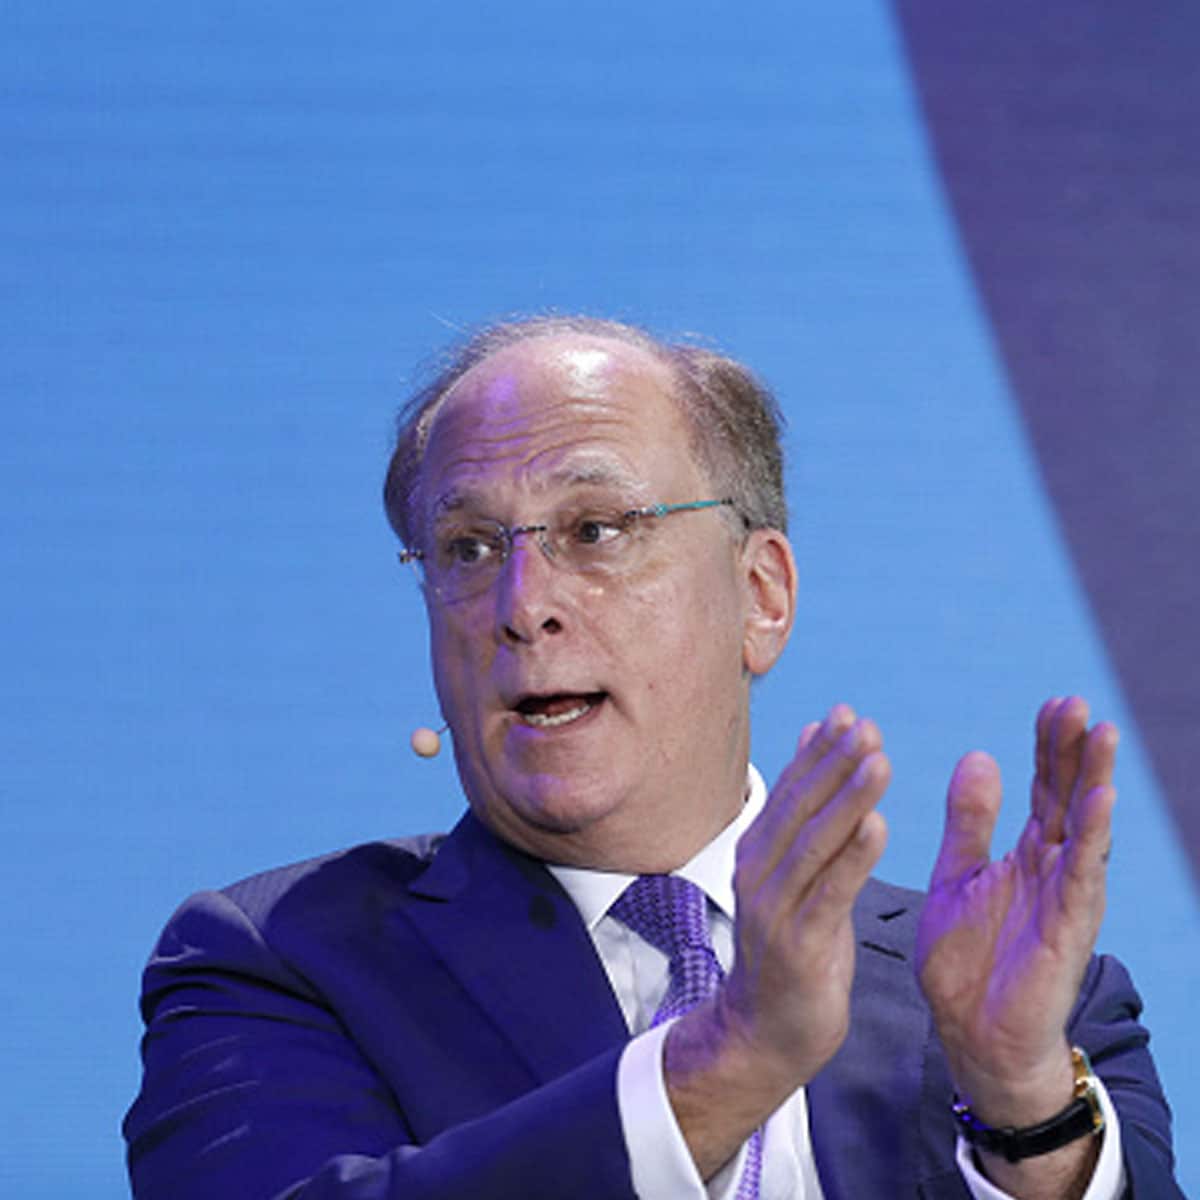 Larry Fink speaks during a panel discussion at the Bloomberg New Economy Forum